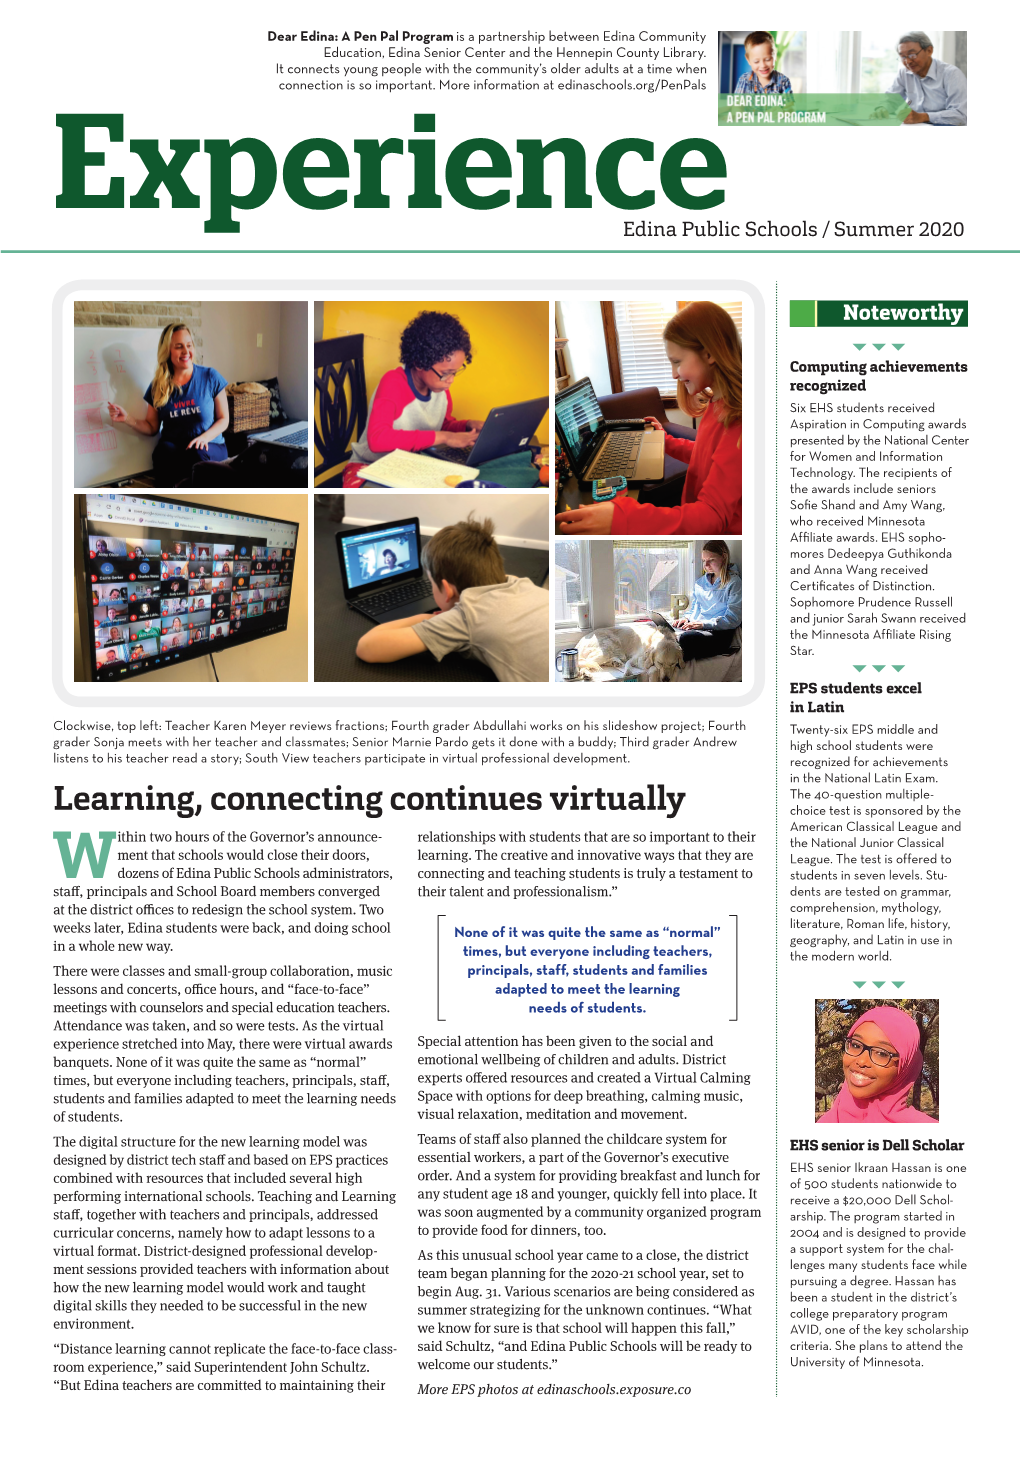 Learning, Connecting Continues Virtually